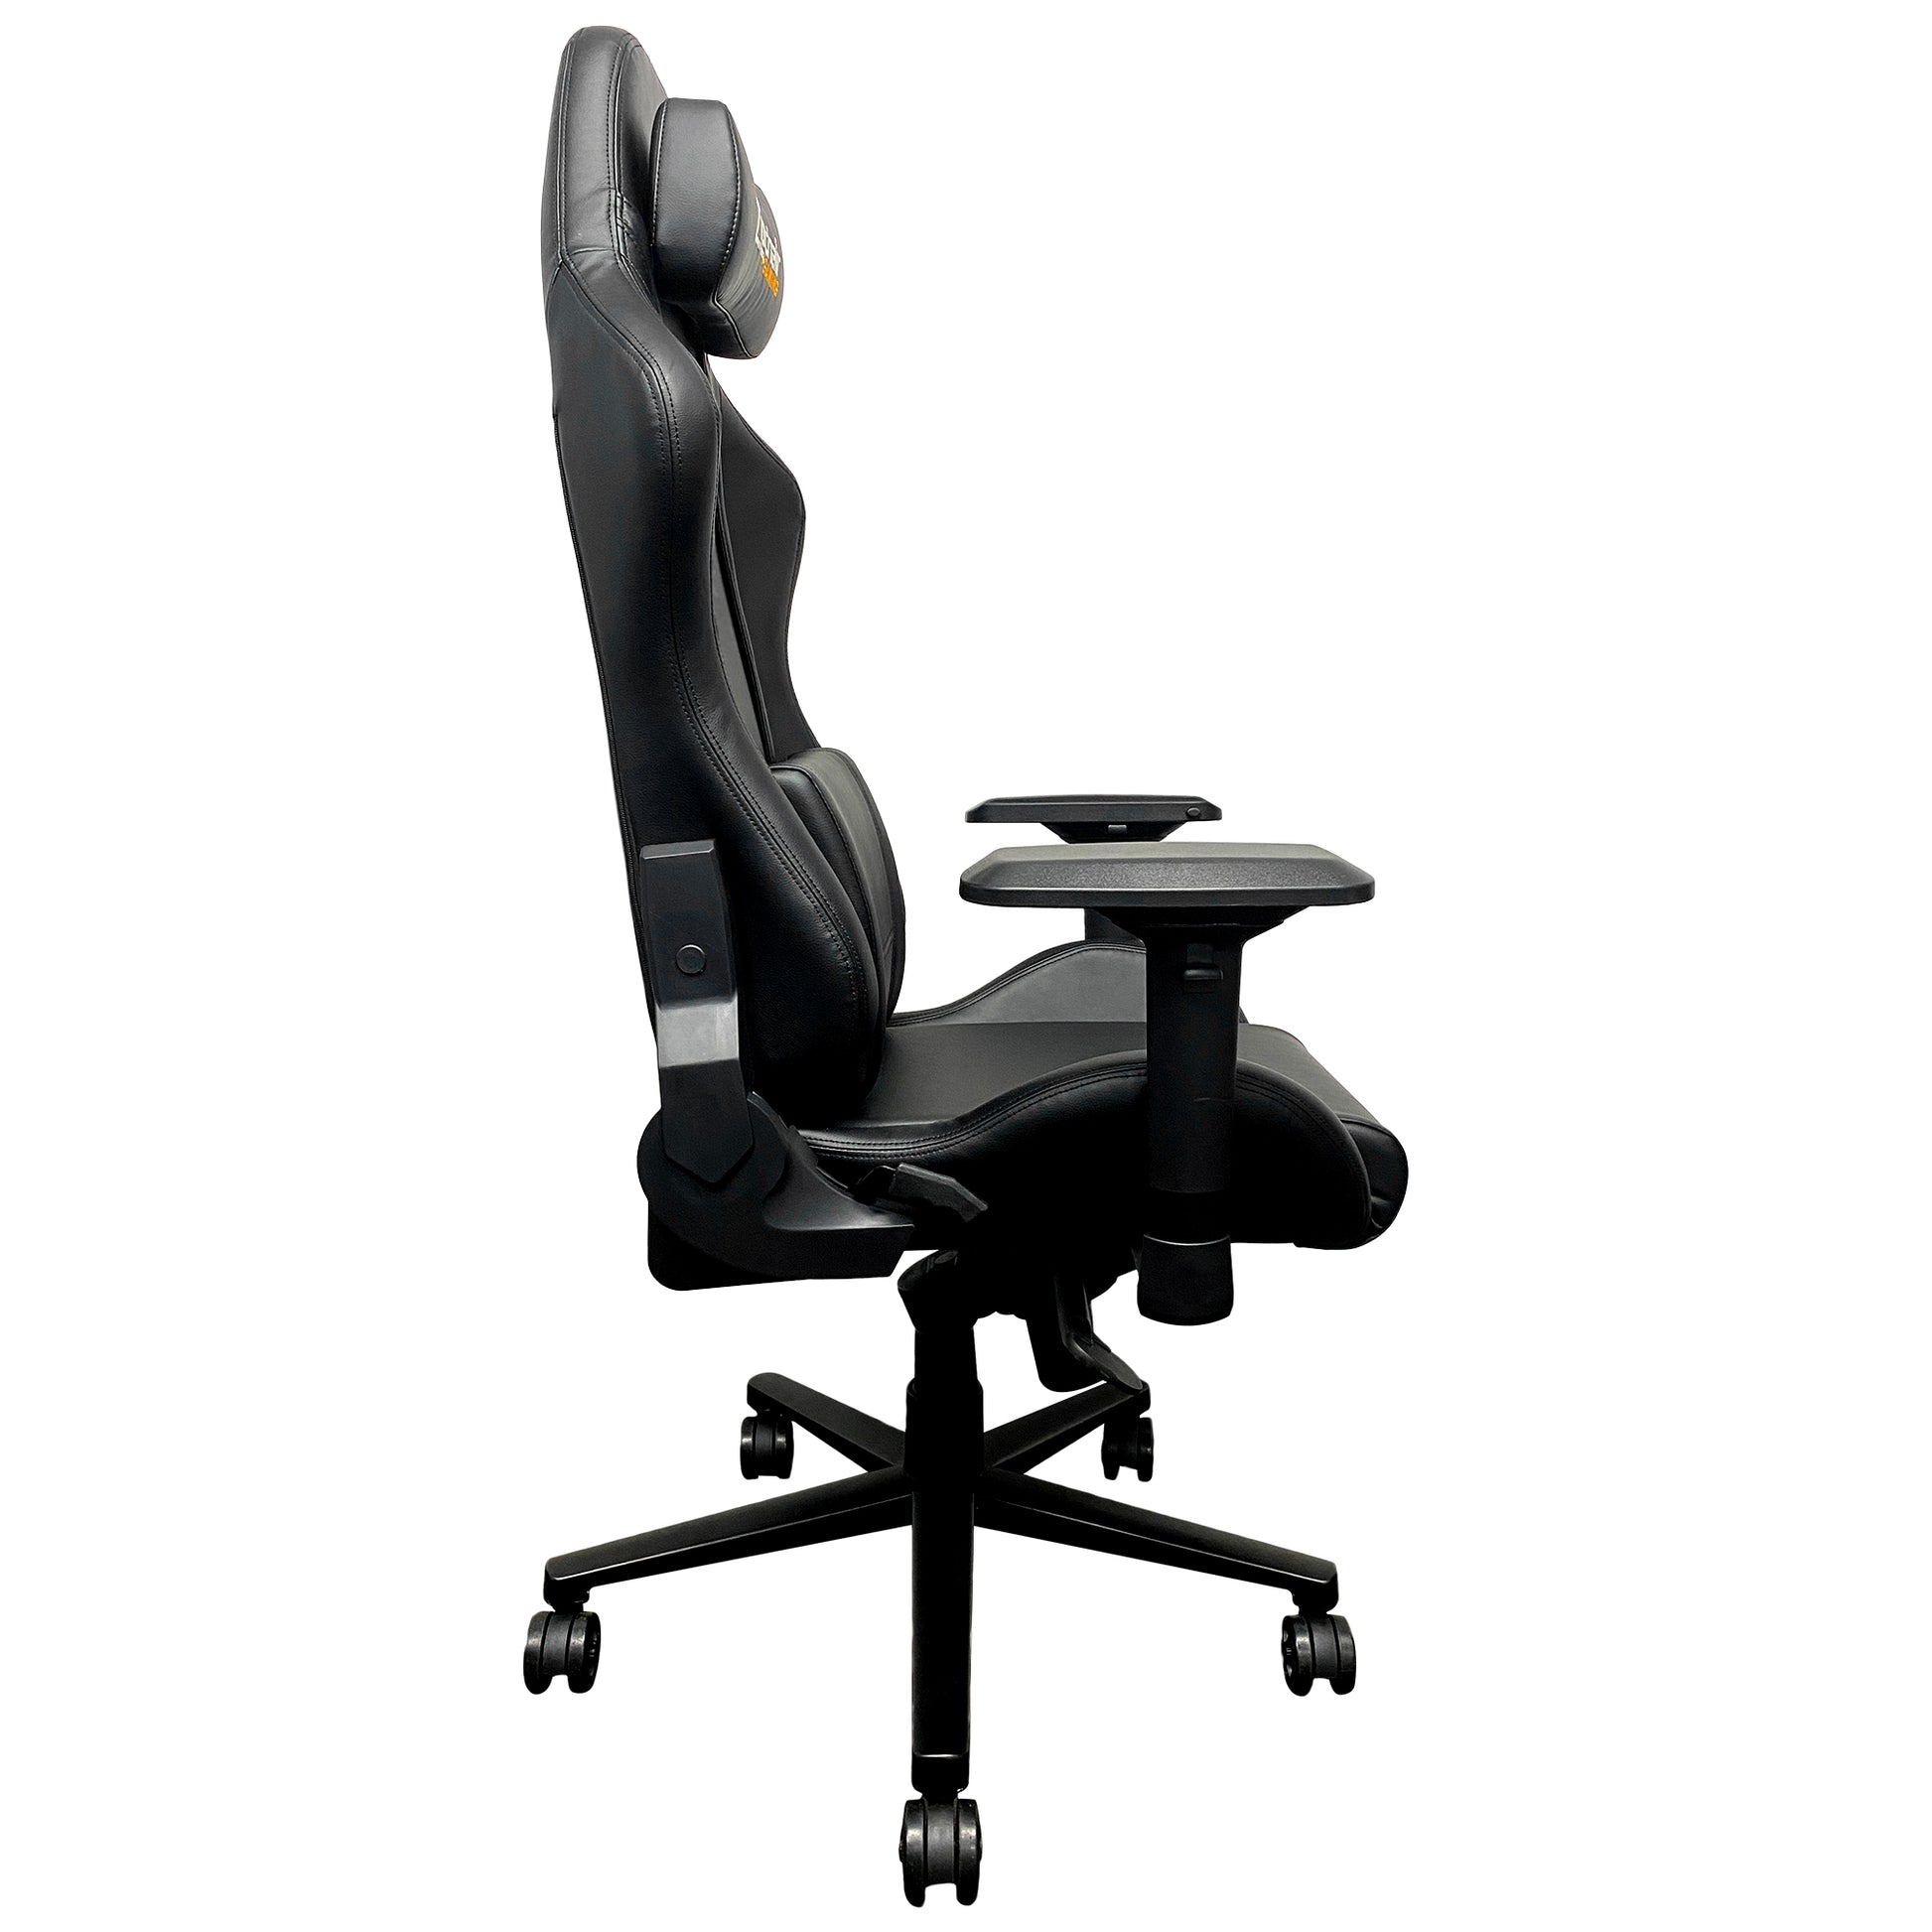 Phoenix Suns Xpression PRO Gaming Chair